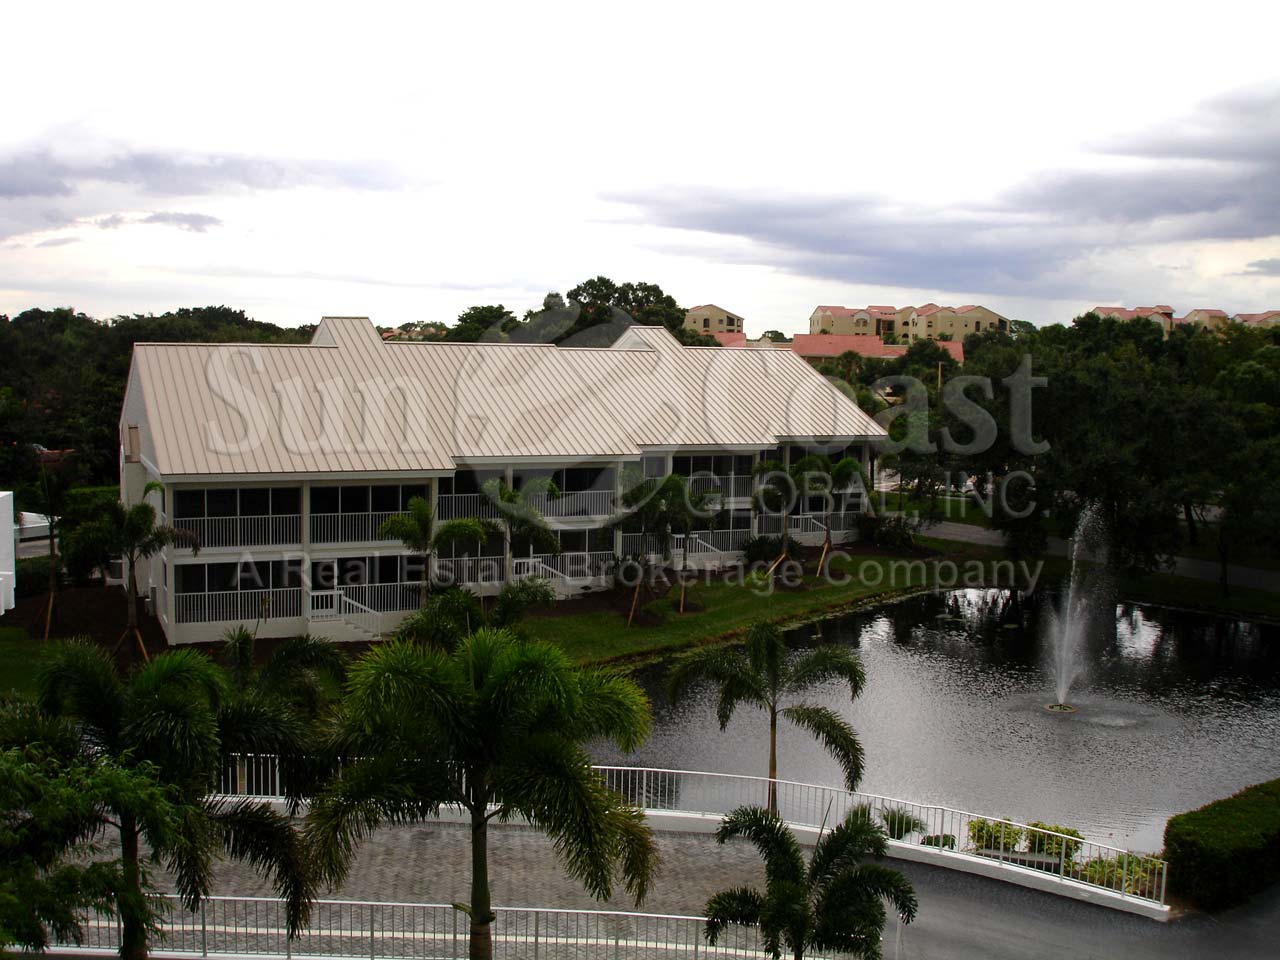 View of the St Lucia Condominiums and Lanais overlooking the Community Lake and Fountain 